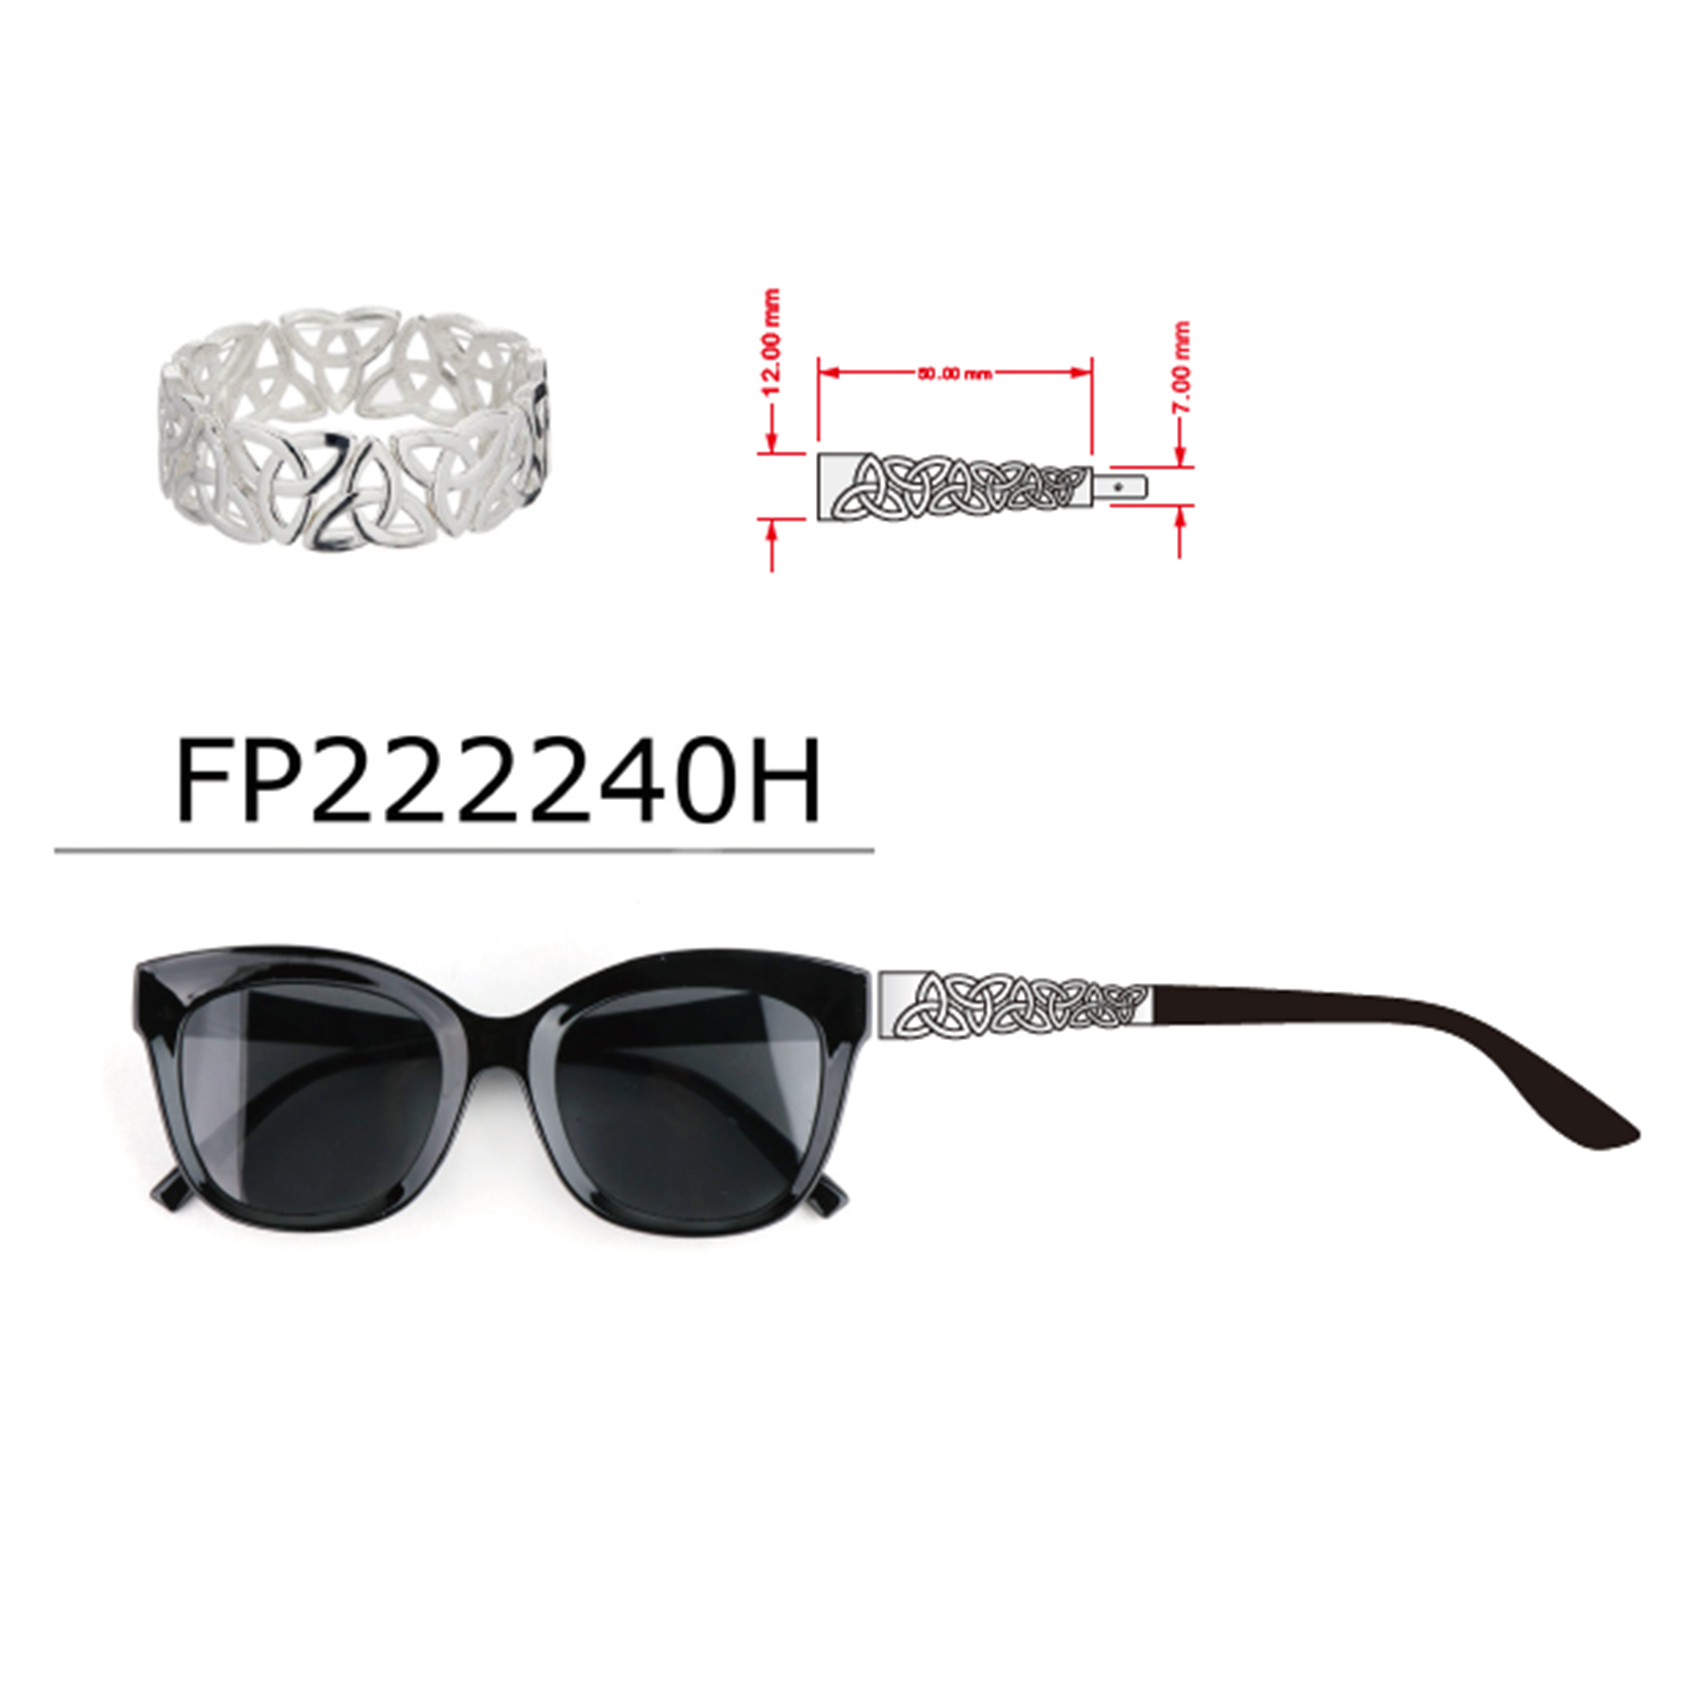 Custom Sunglasses Manufacturers Designing Sunglasses with Jewelry Elements